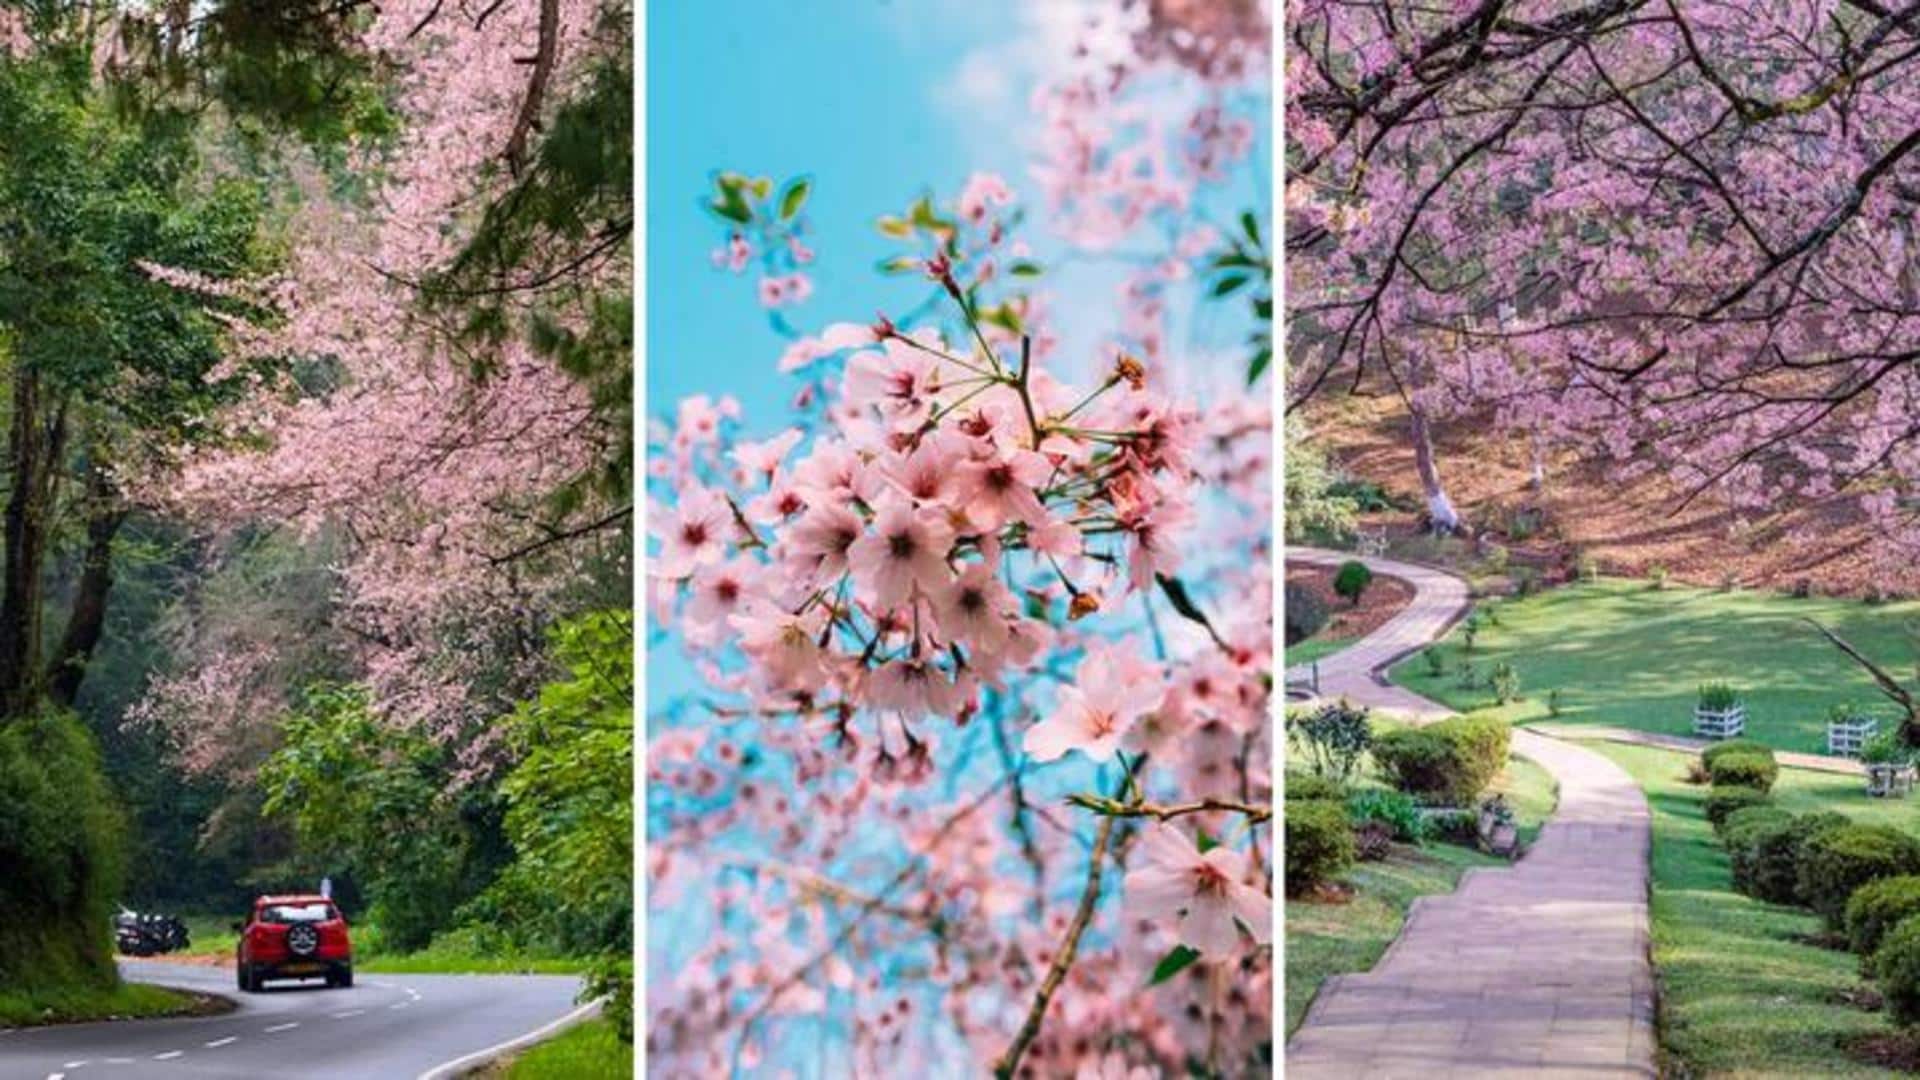 Ready for Shillong Cherry Blossom Festival? Here's all about it